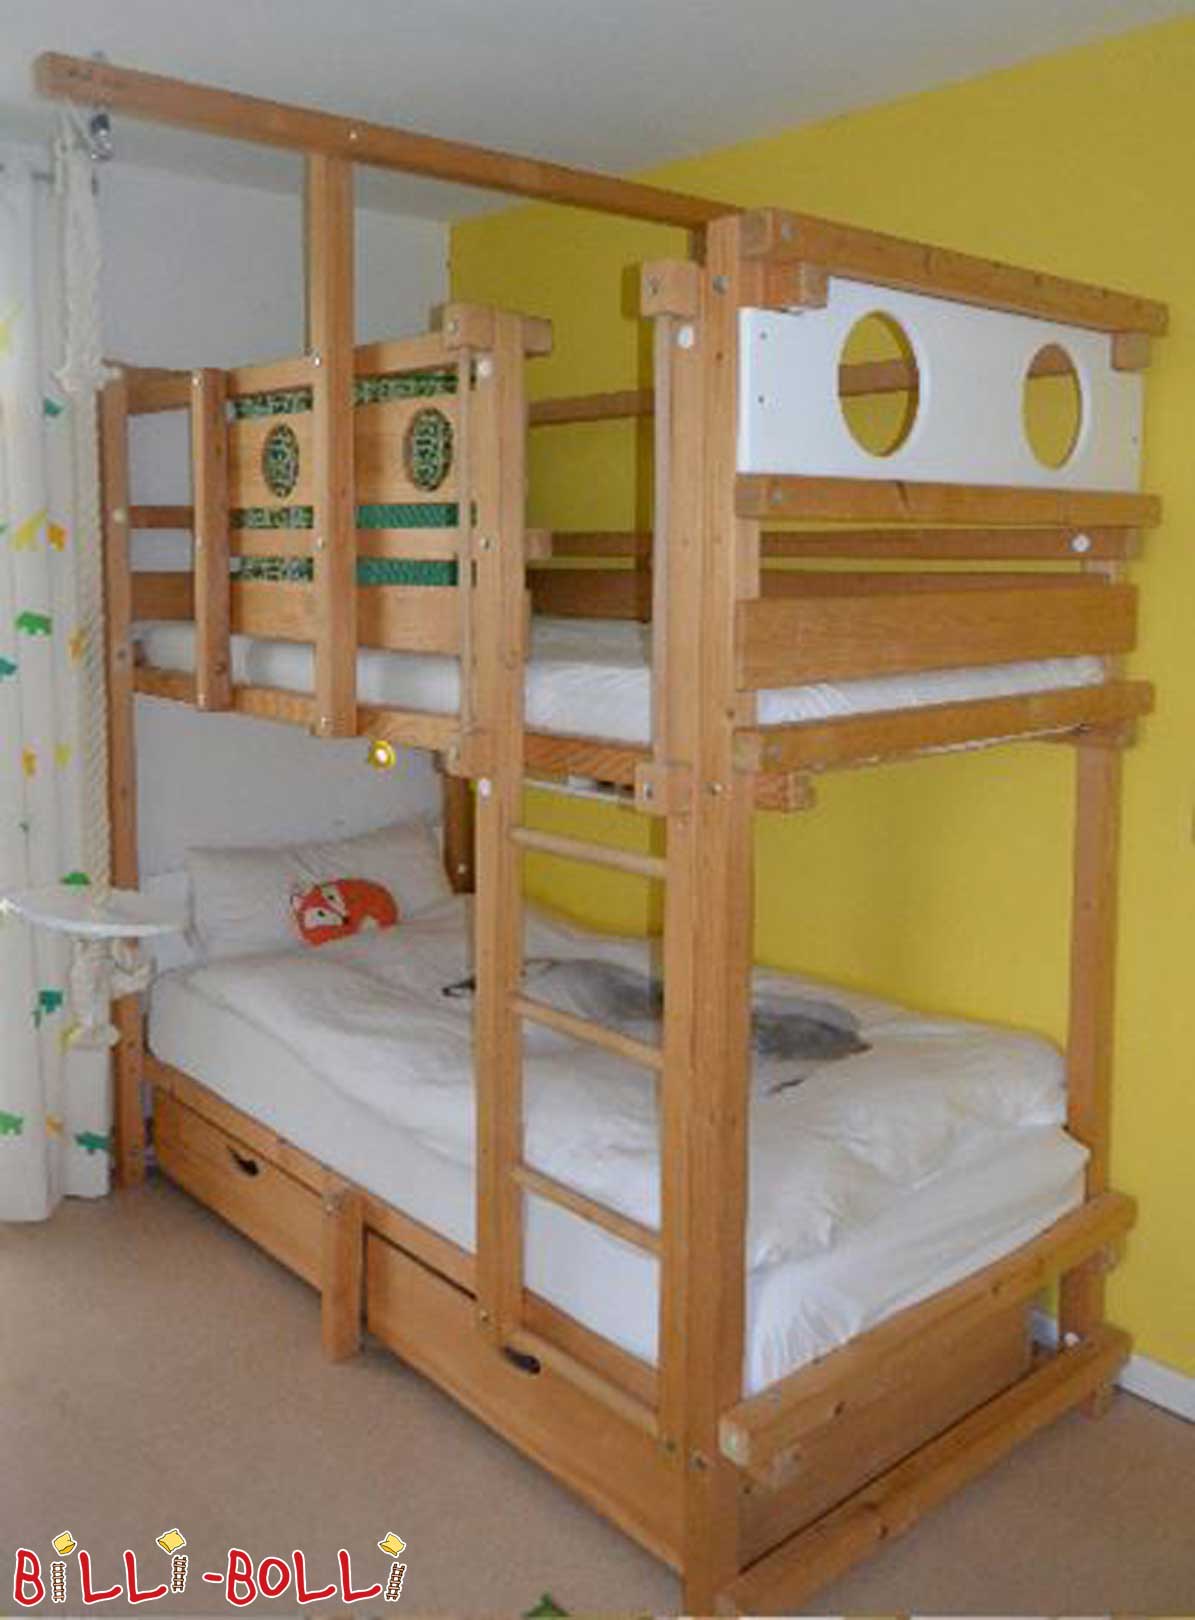 BILLI-BOLLI BED to be given to adventurers! (Category: second hand loft bed)